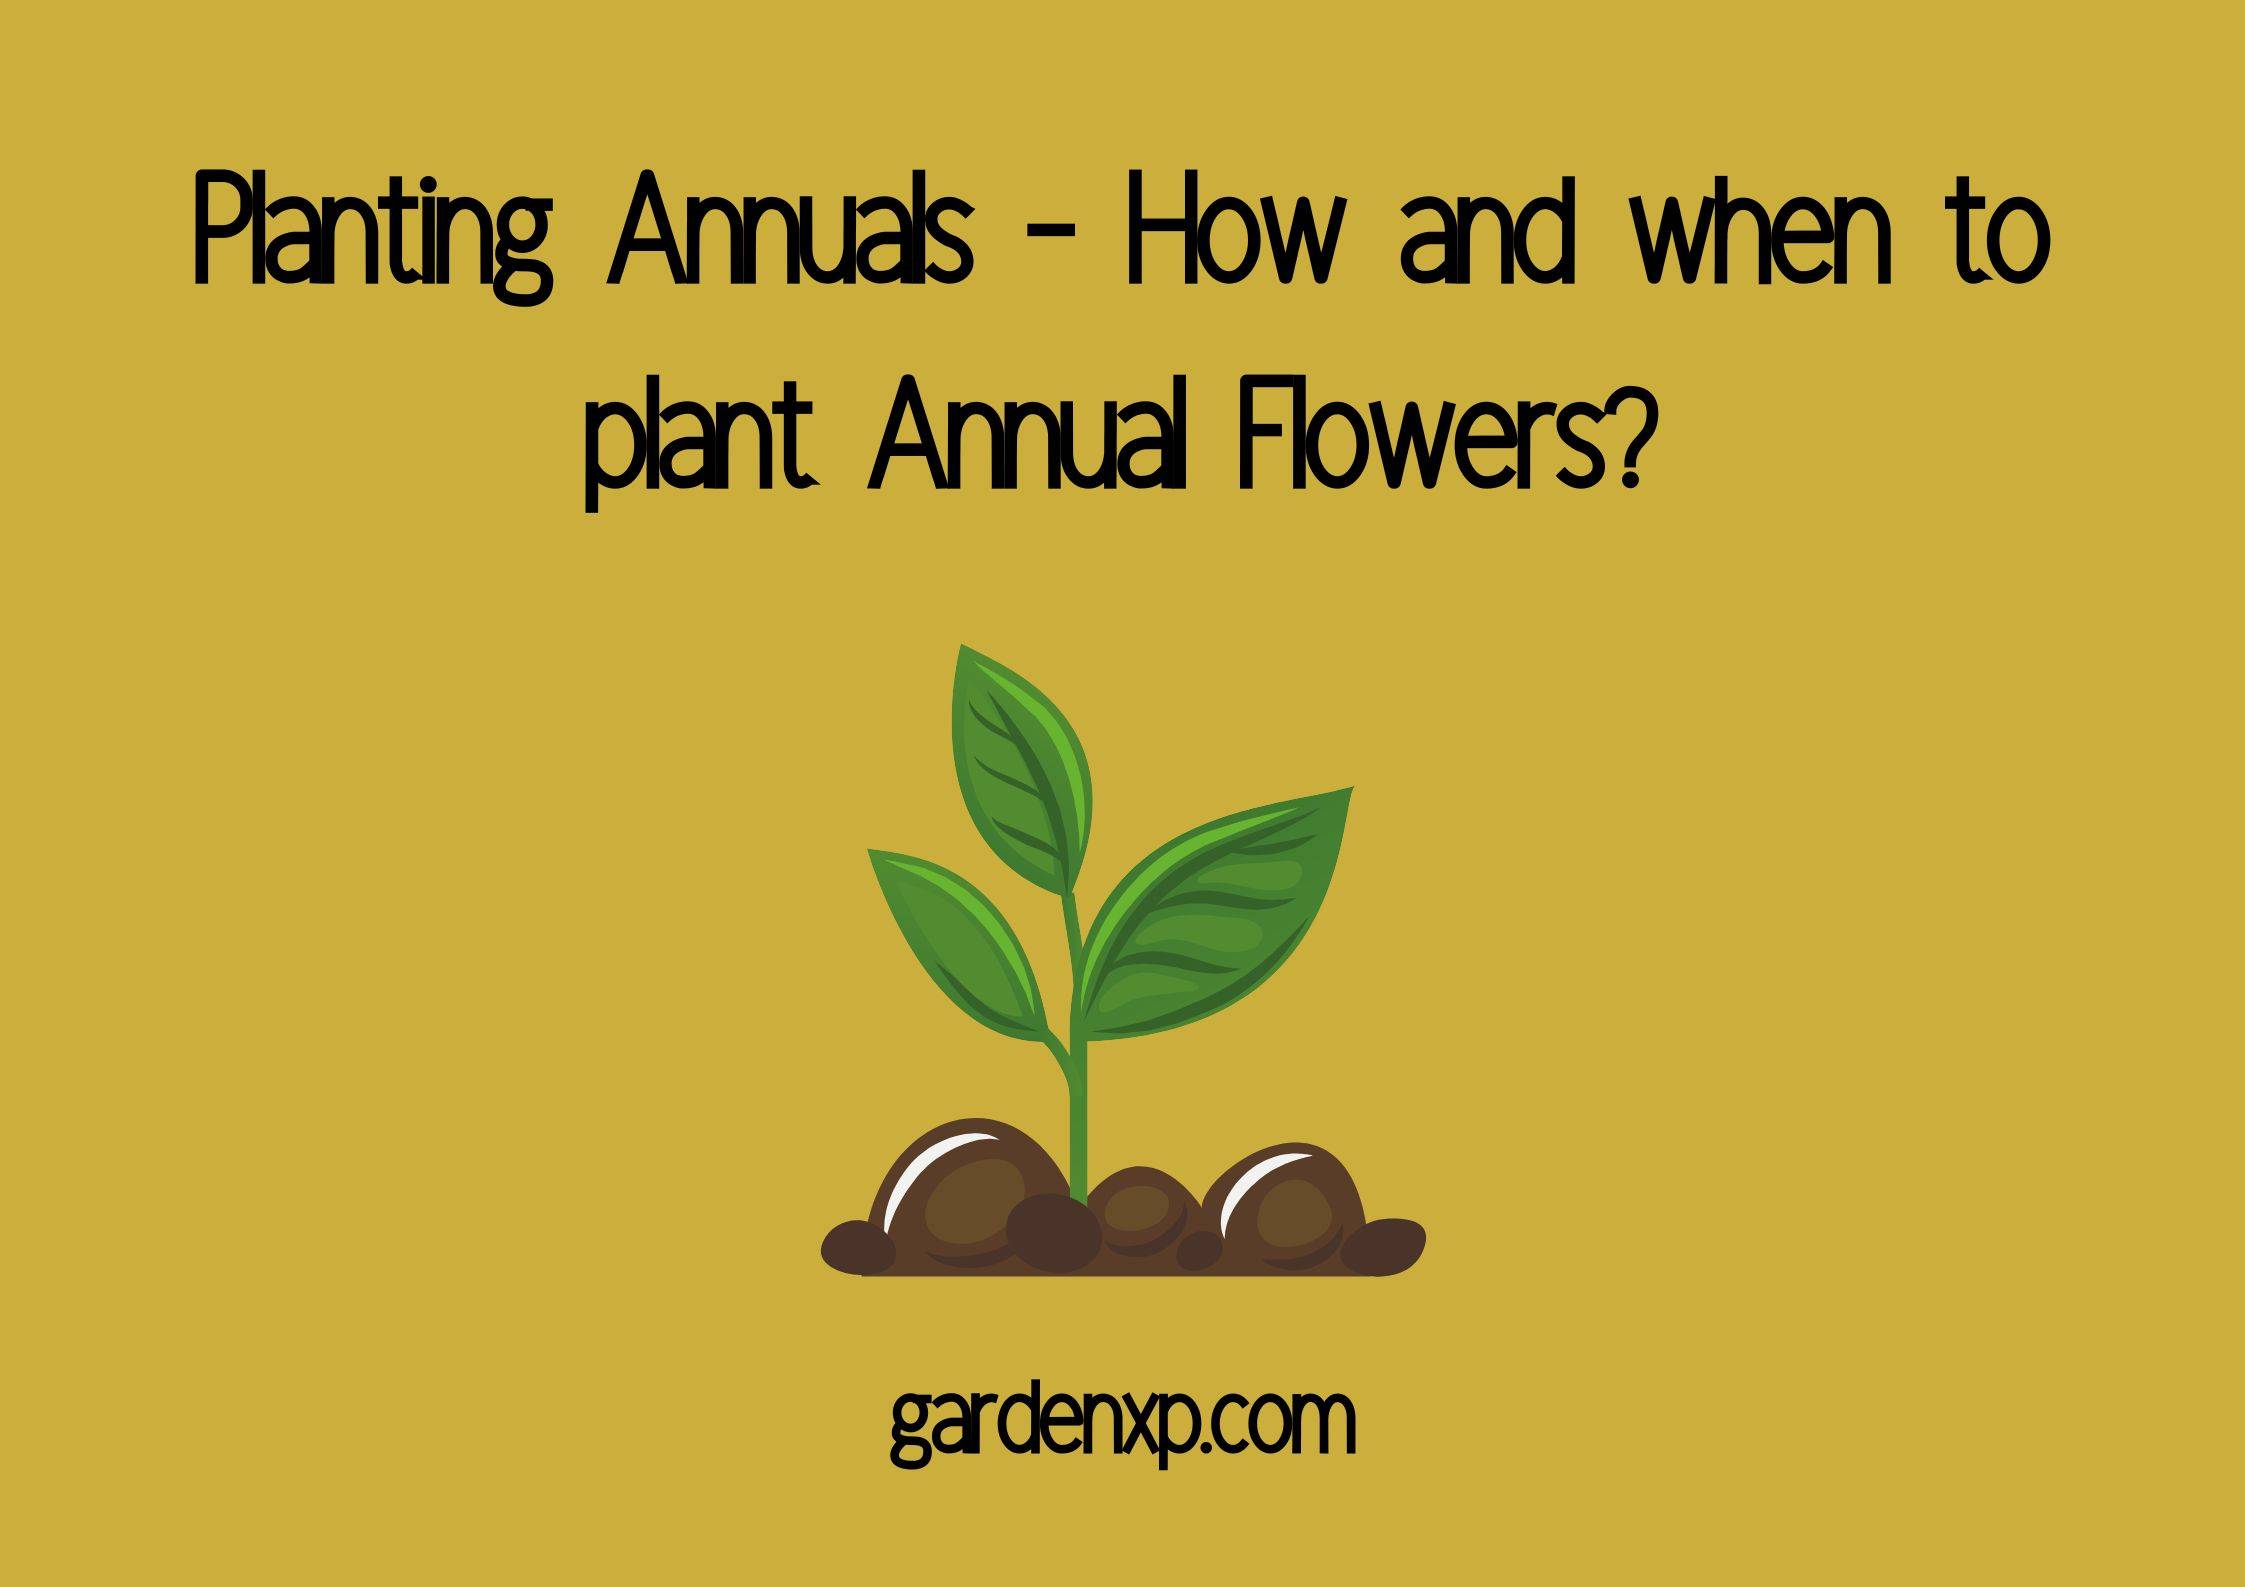 Planting Annuals - How and when to plant Annual Flowers?